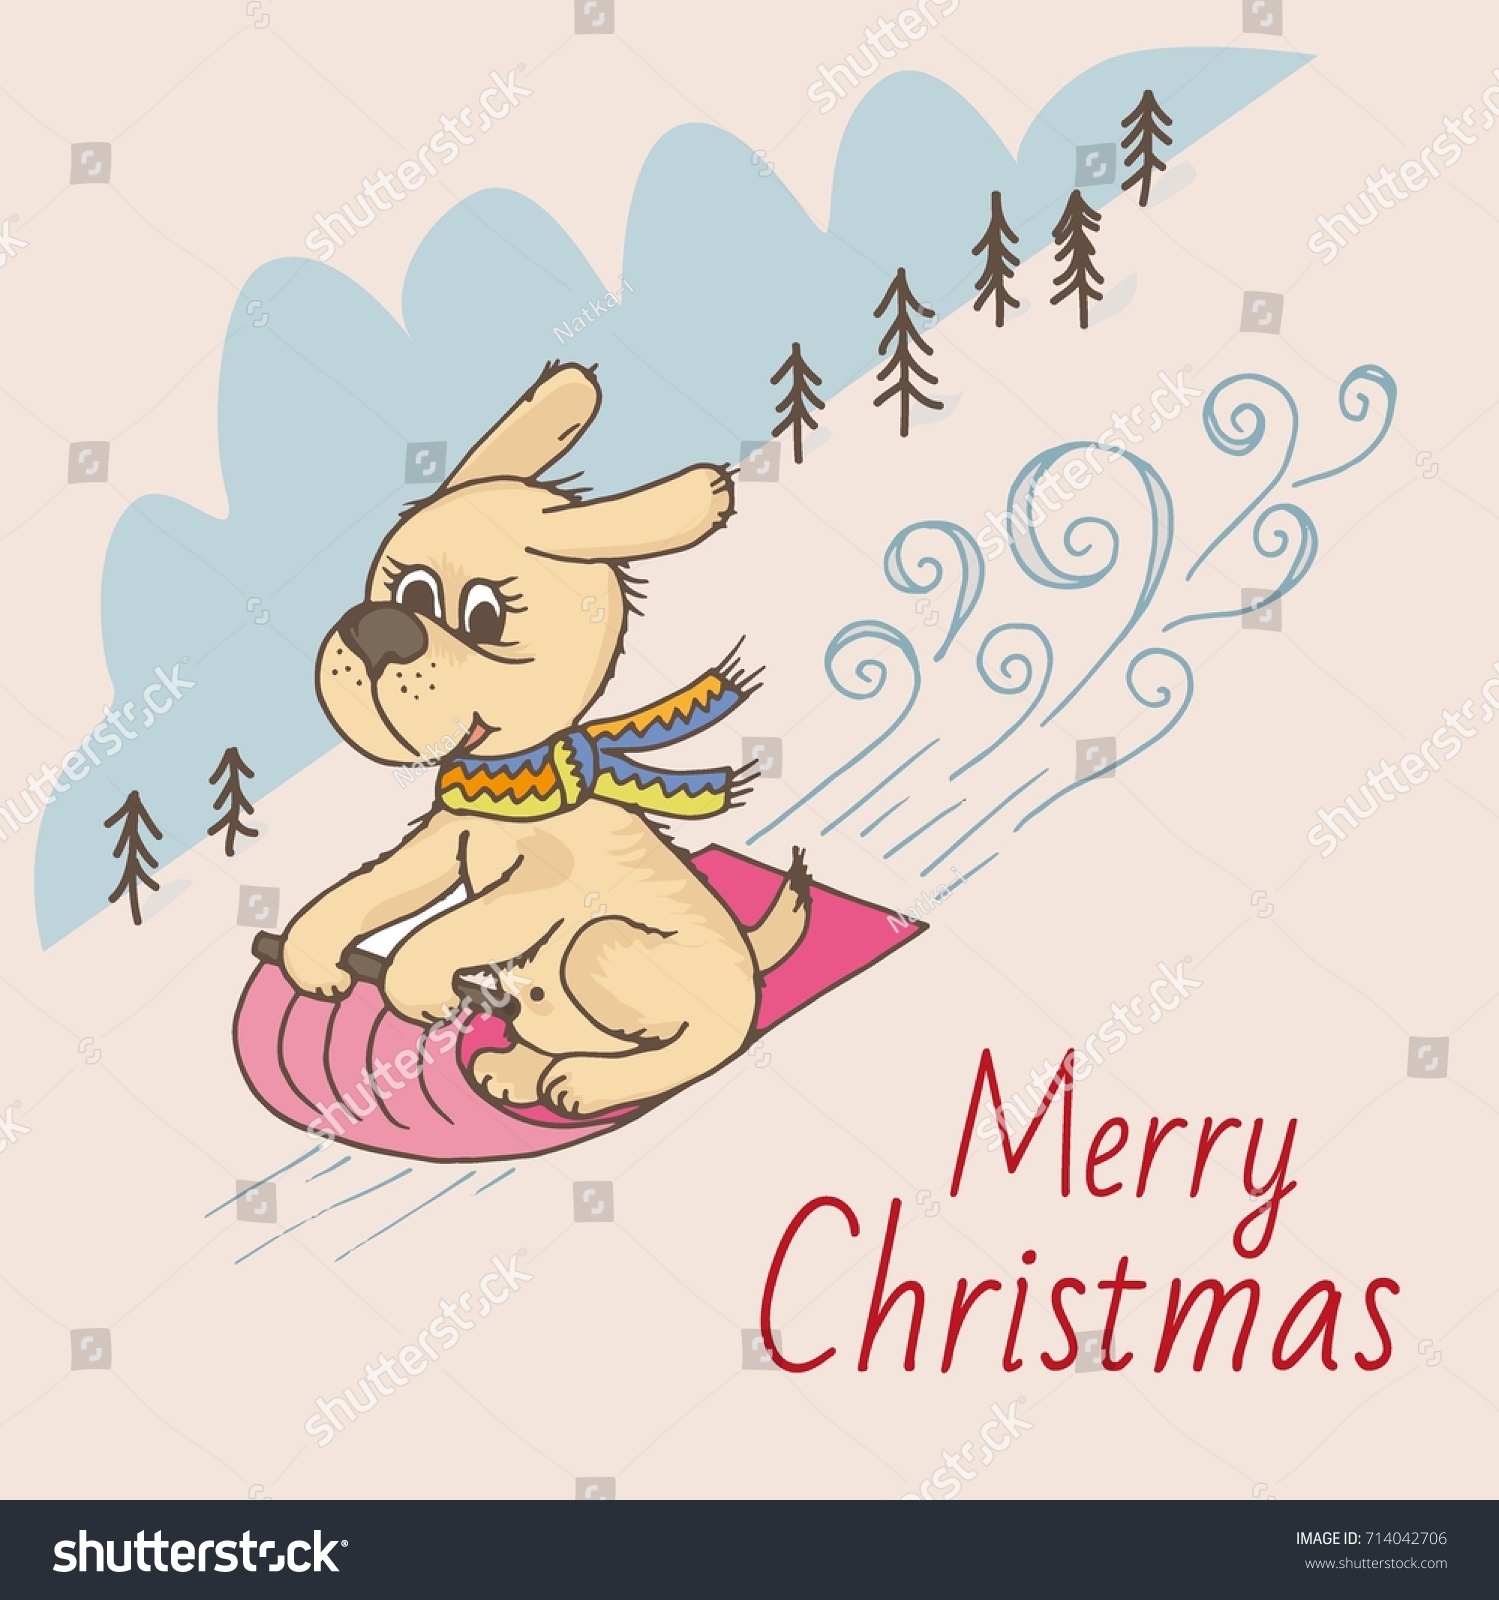 Doodle dog rolls down the mountain on a sleigh, merry Christmas greeting card #714042706